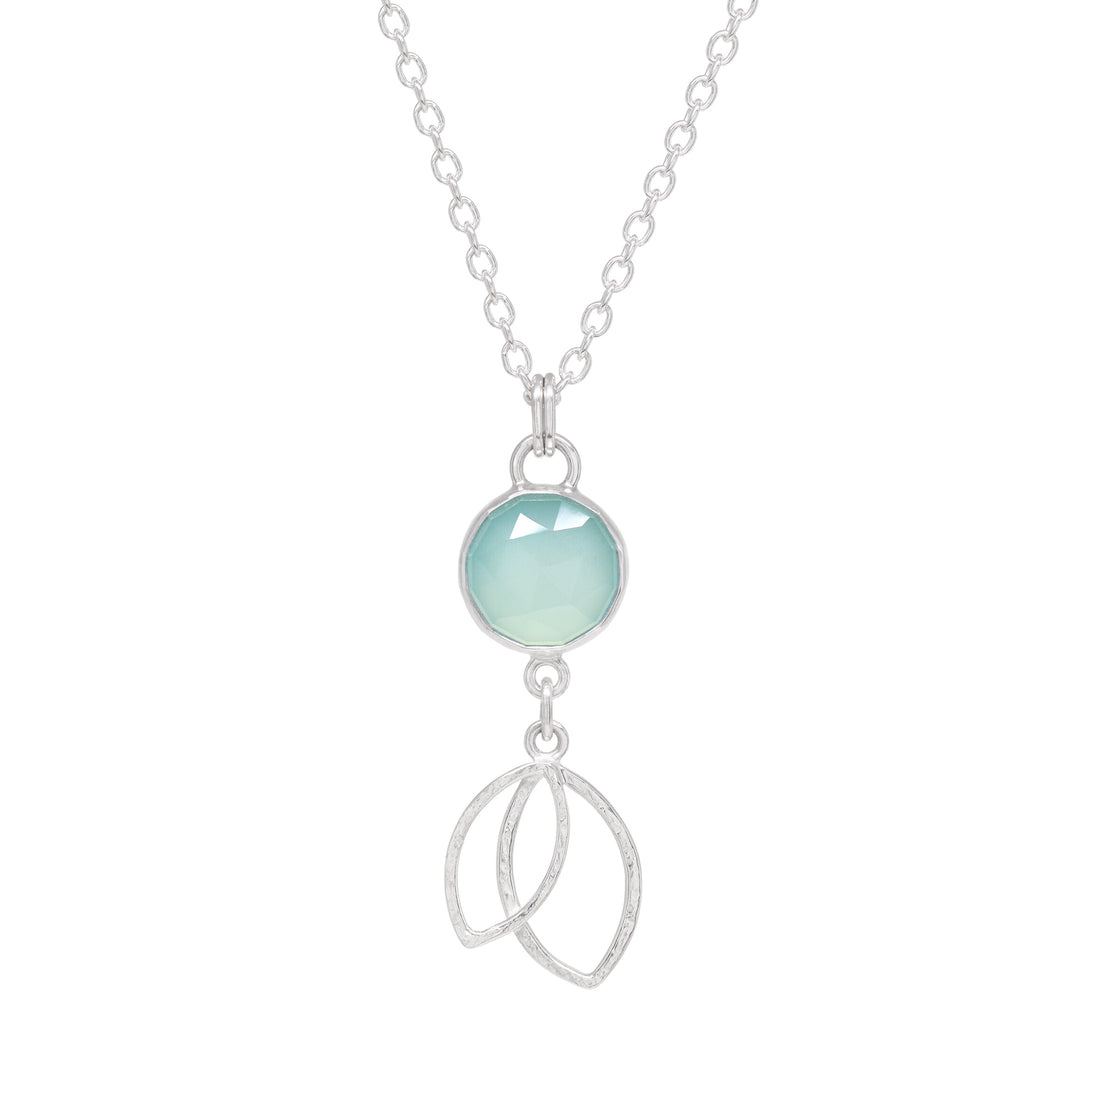 Double Leaf Necklace Small - Chalcedony - Bright Sterling